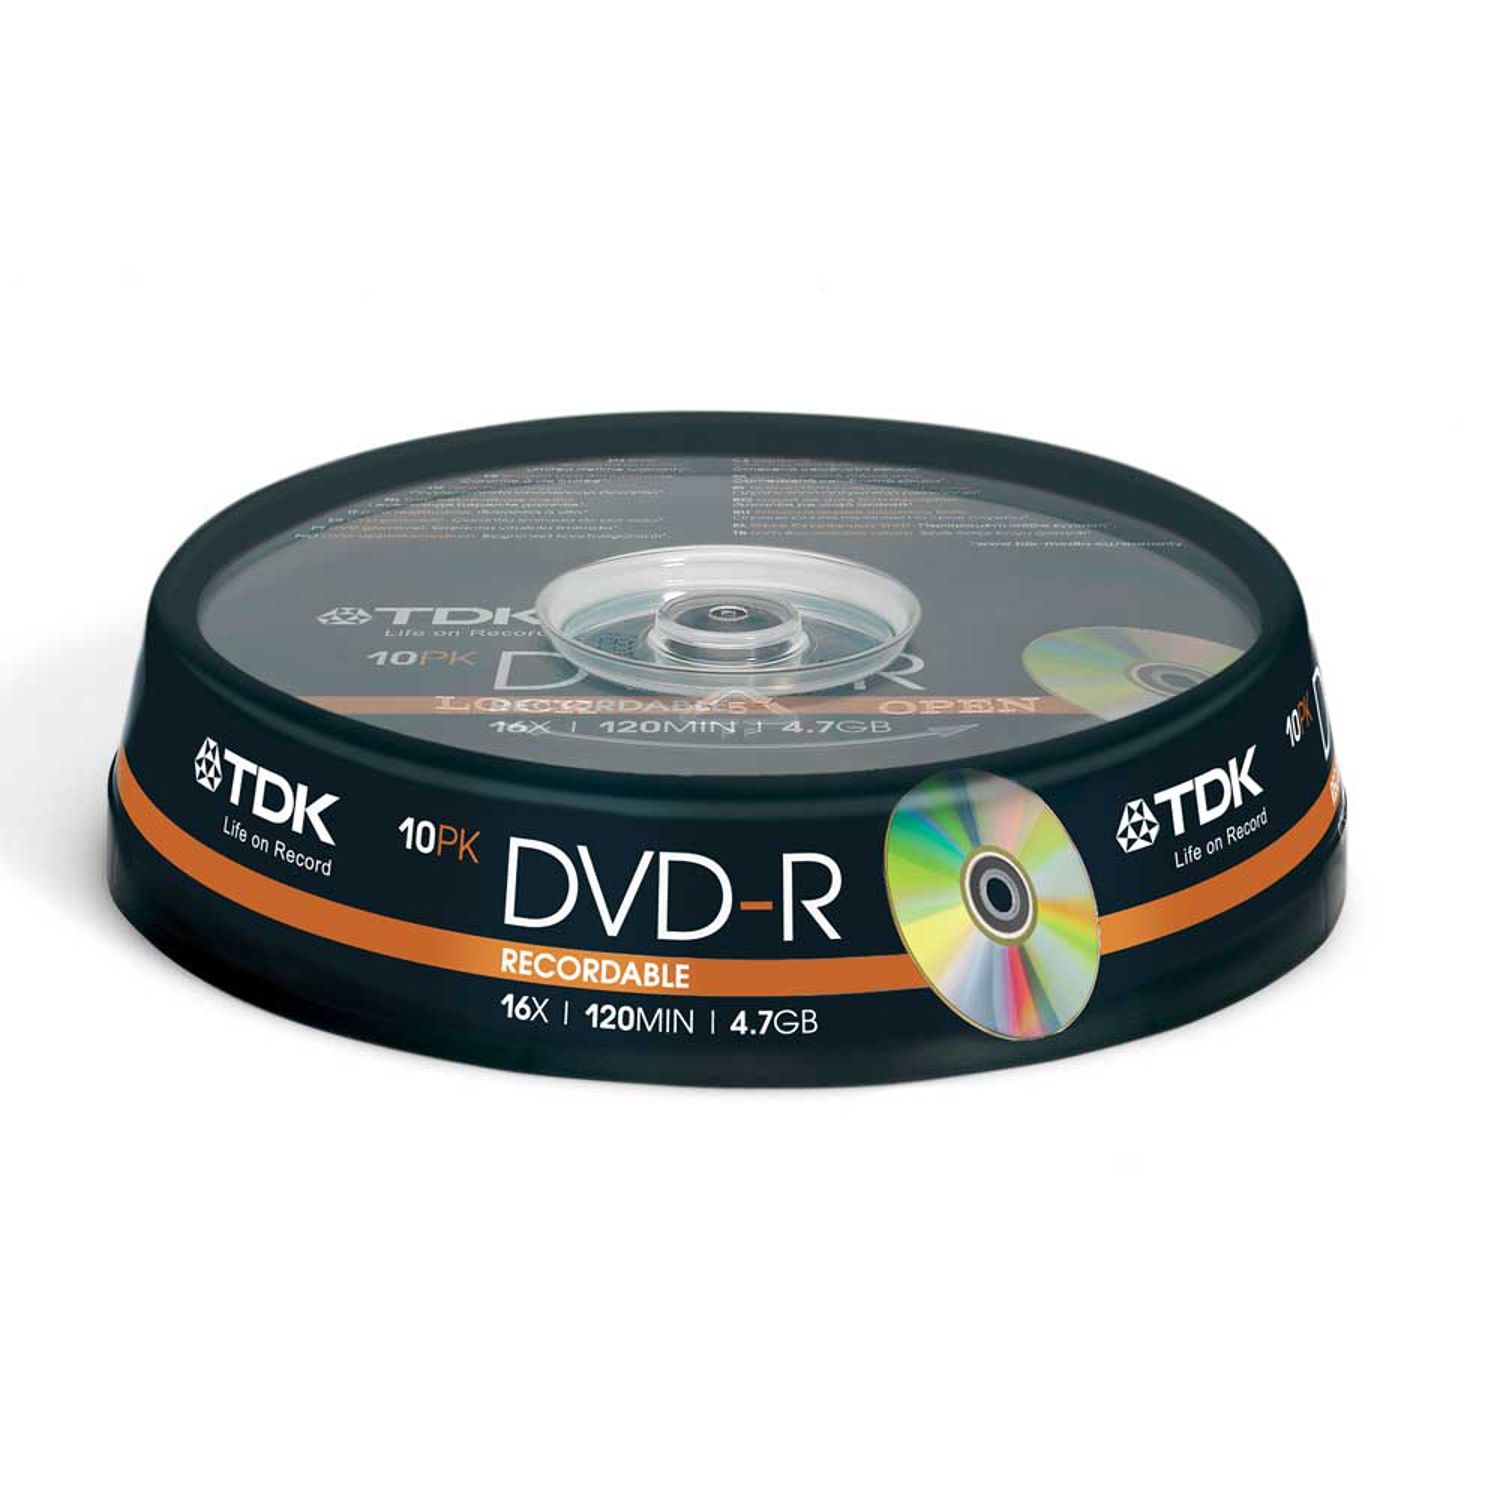 blank-dvd-discs-lifestyle-dvd-selections-chums